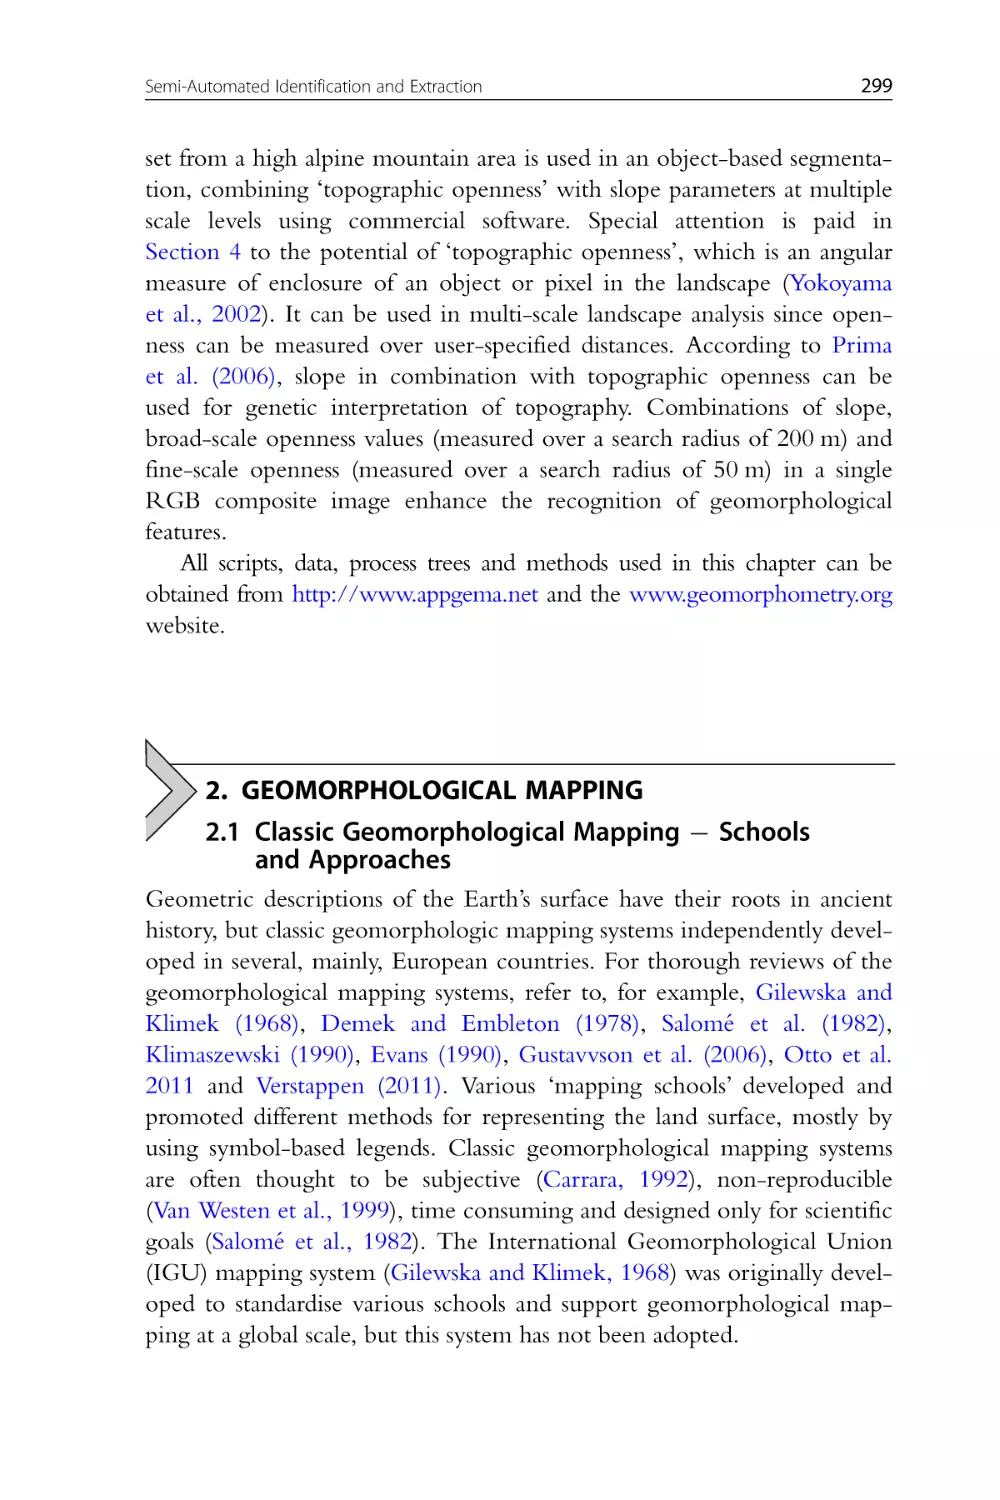 2. Geomorphological Mapping
2.1 Classic Geomorphological Mapping – Schools and Approaches